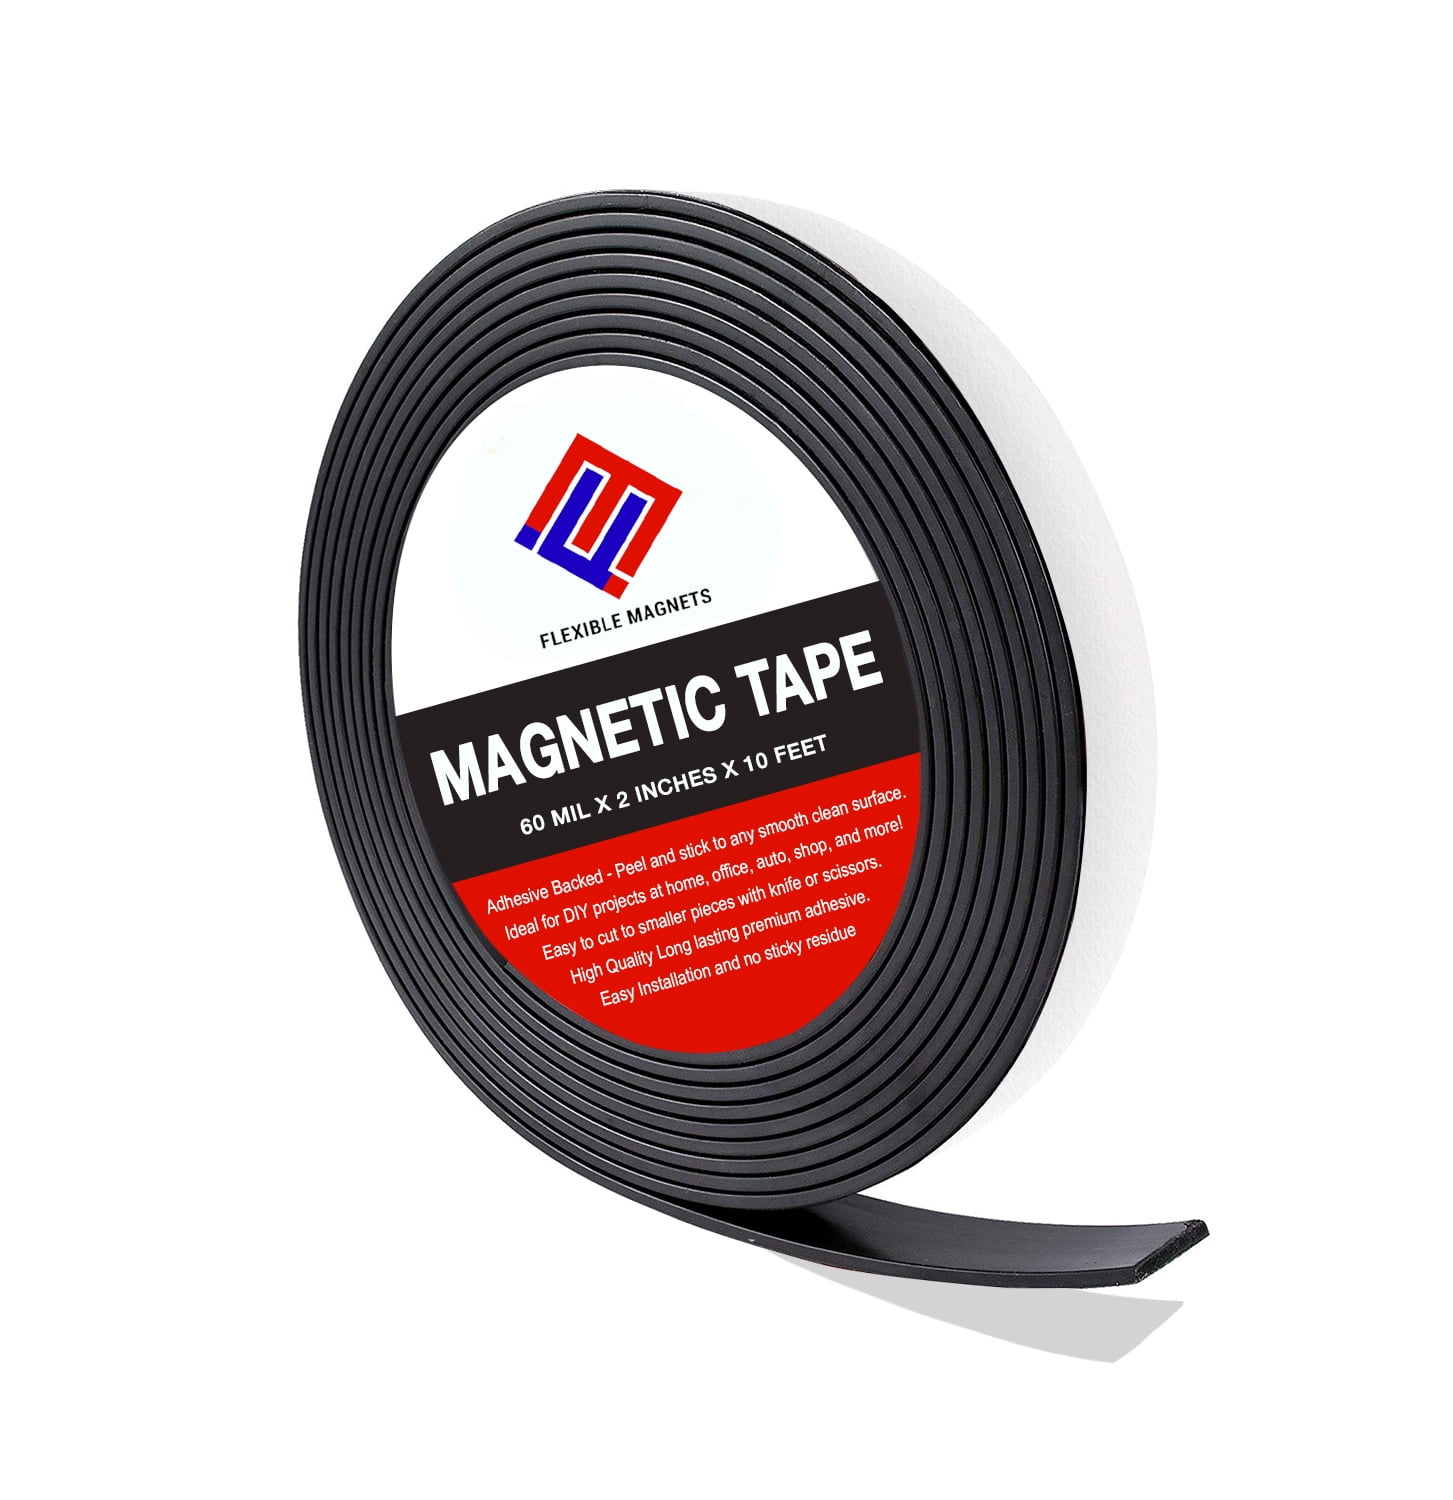  Magnetic Tape Strips with Adhesive-Backing - Sukh Magnetic  Strip,Magnet Band Strong Adhesive Cuttable Magnetic Sheets Magnets Perfect  for DIY, Art Projects,Whiteboards,Fridge Organization Classroom : Office  Products